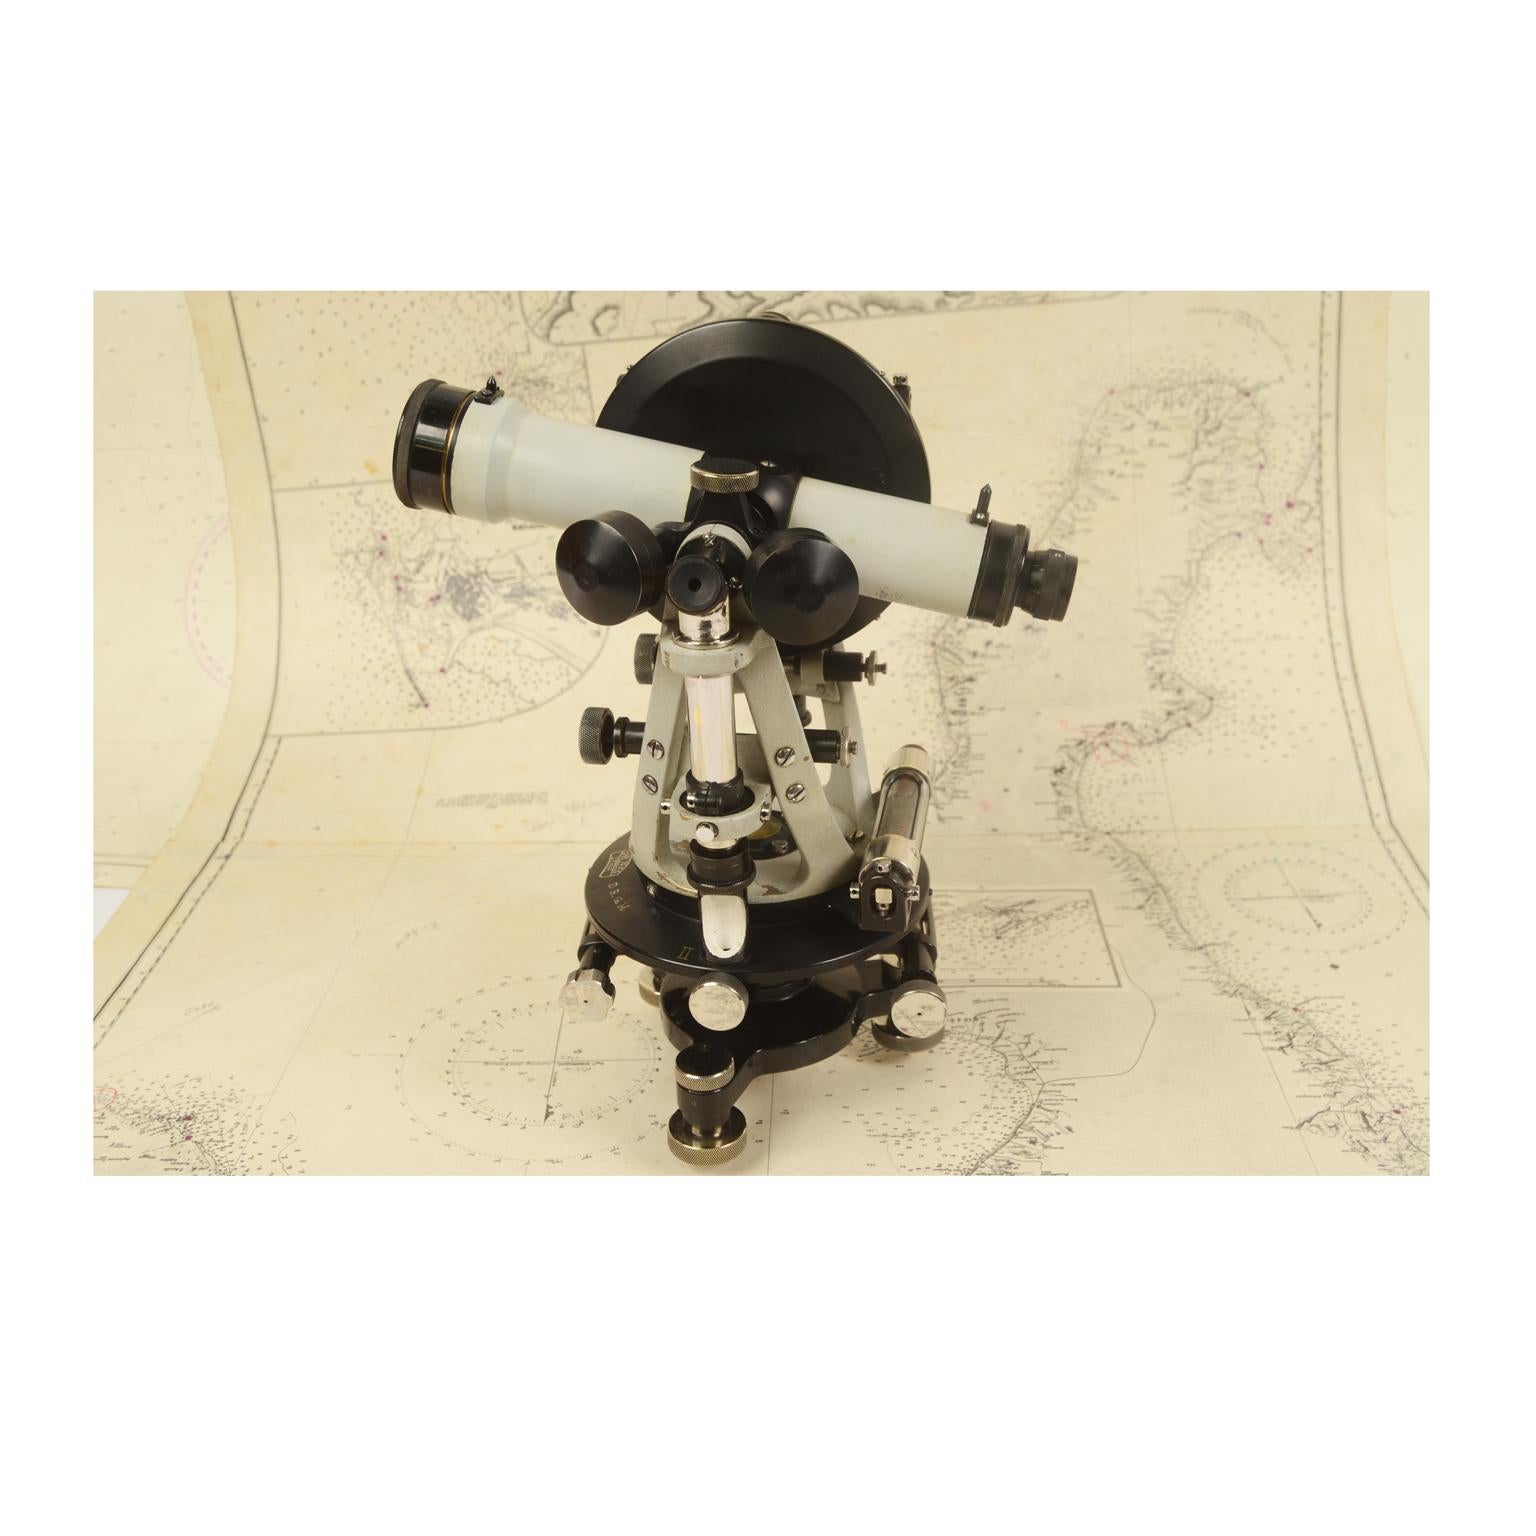 Theodolite by Carl Zeiss Jena D.R.G.M. 1920s, light gray and black painted brass, internal horizontal and vertical circle with microscope readings, rack and pinion focusing. Very good condition, some signs of use and fully functional. Measures: